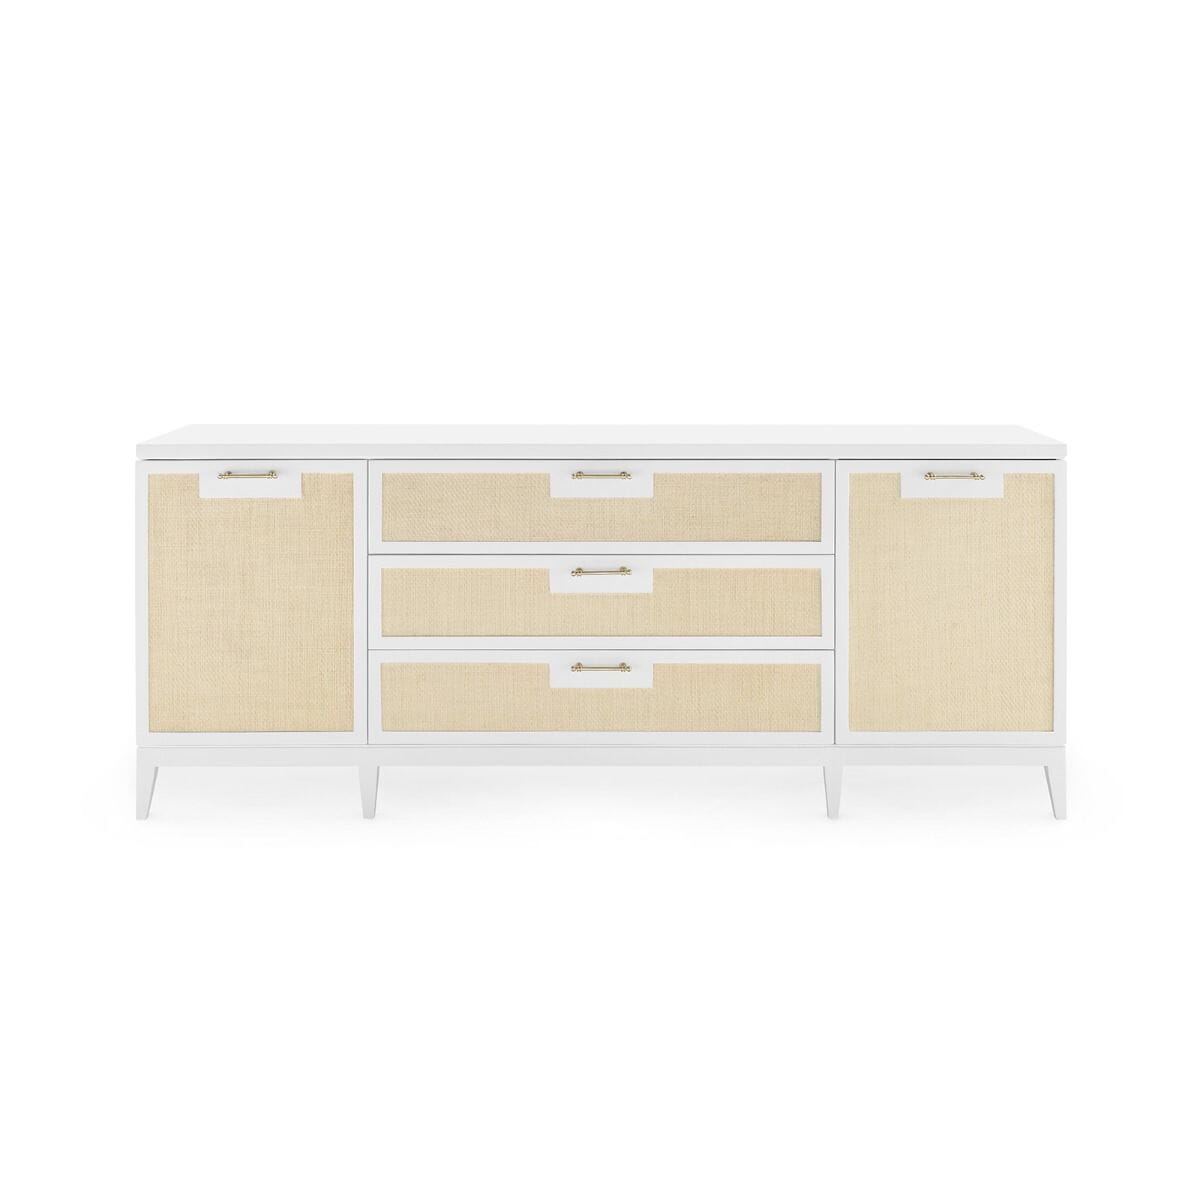 Astor Large Cabinet Cabinets & Chests White Lacquer 